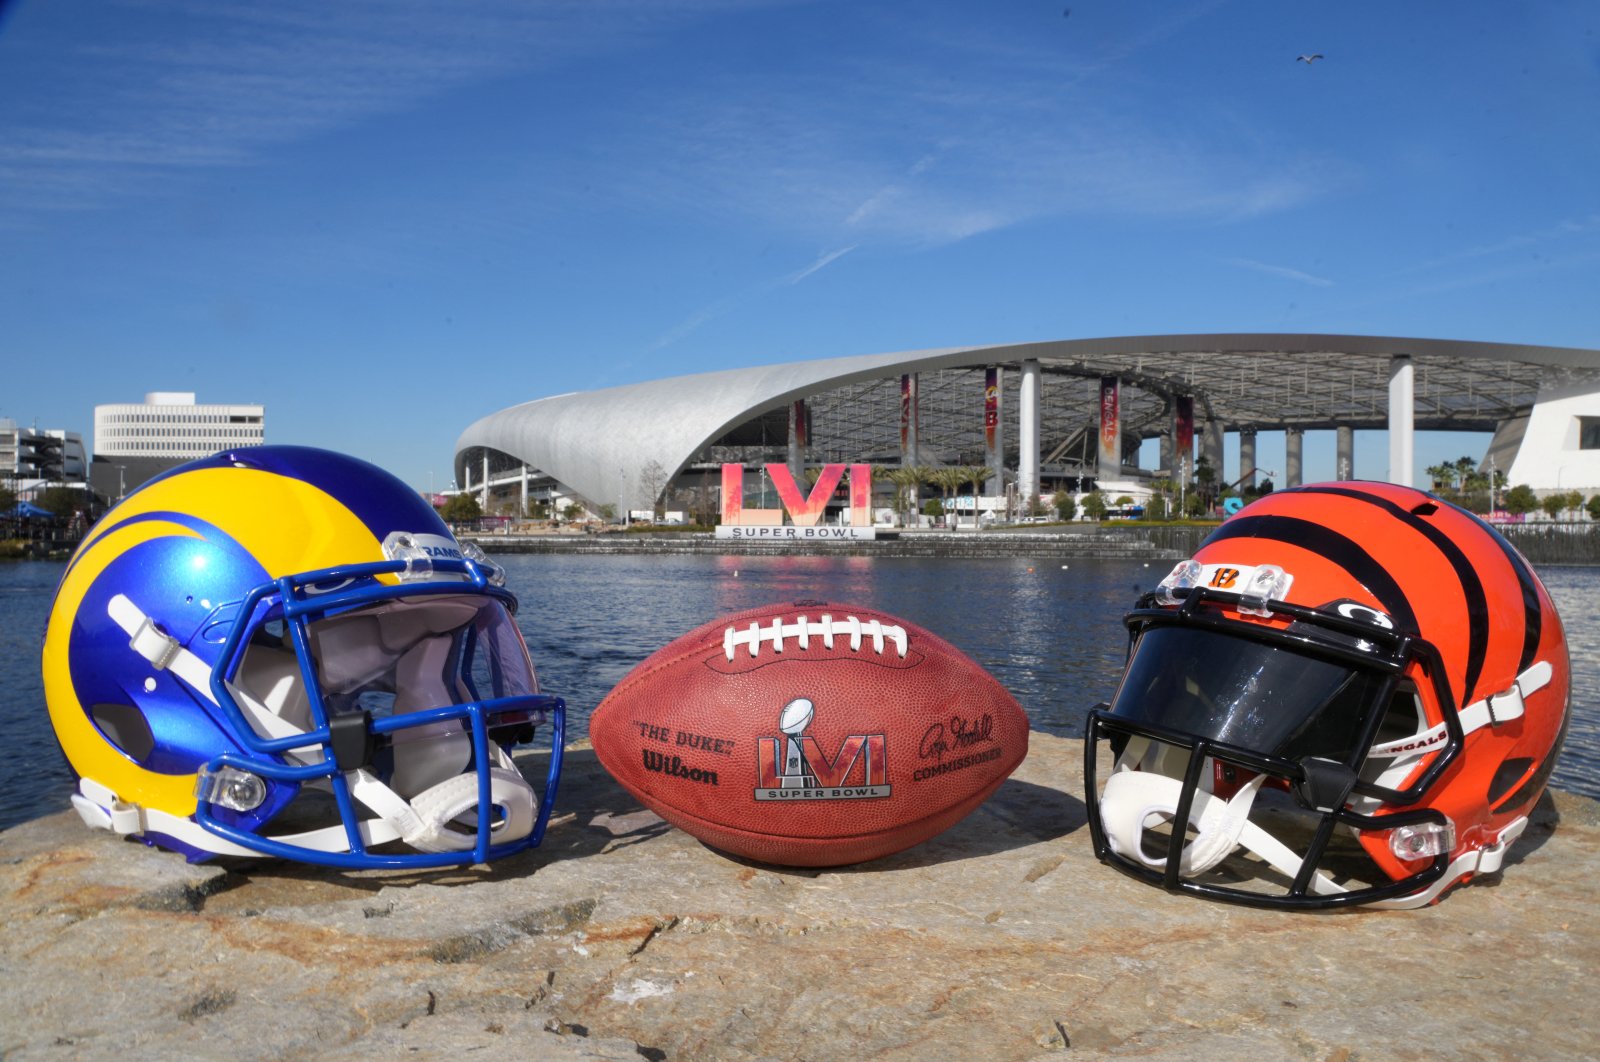 Los Angeles Rams and Cincinnati Bengals helmets are seen with a Wilson NFL official Duke football and the SBLVI numerals at SoFi Stadium, Inglewood, CA, U.S., Feb 8, 2022. (Reuters Photo)